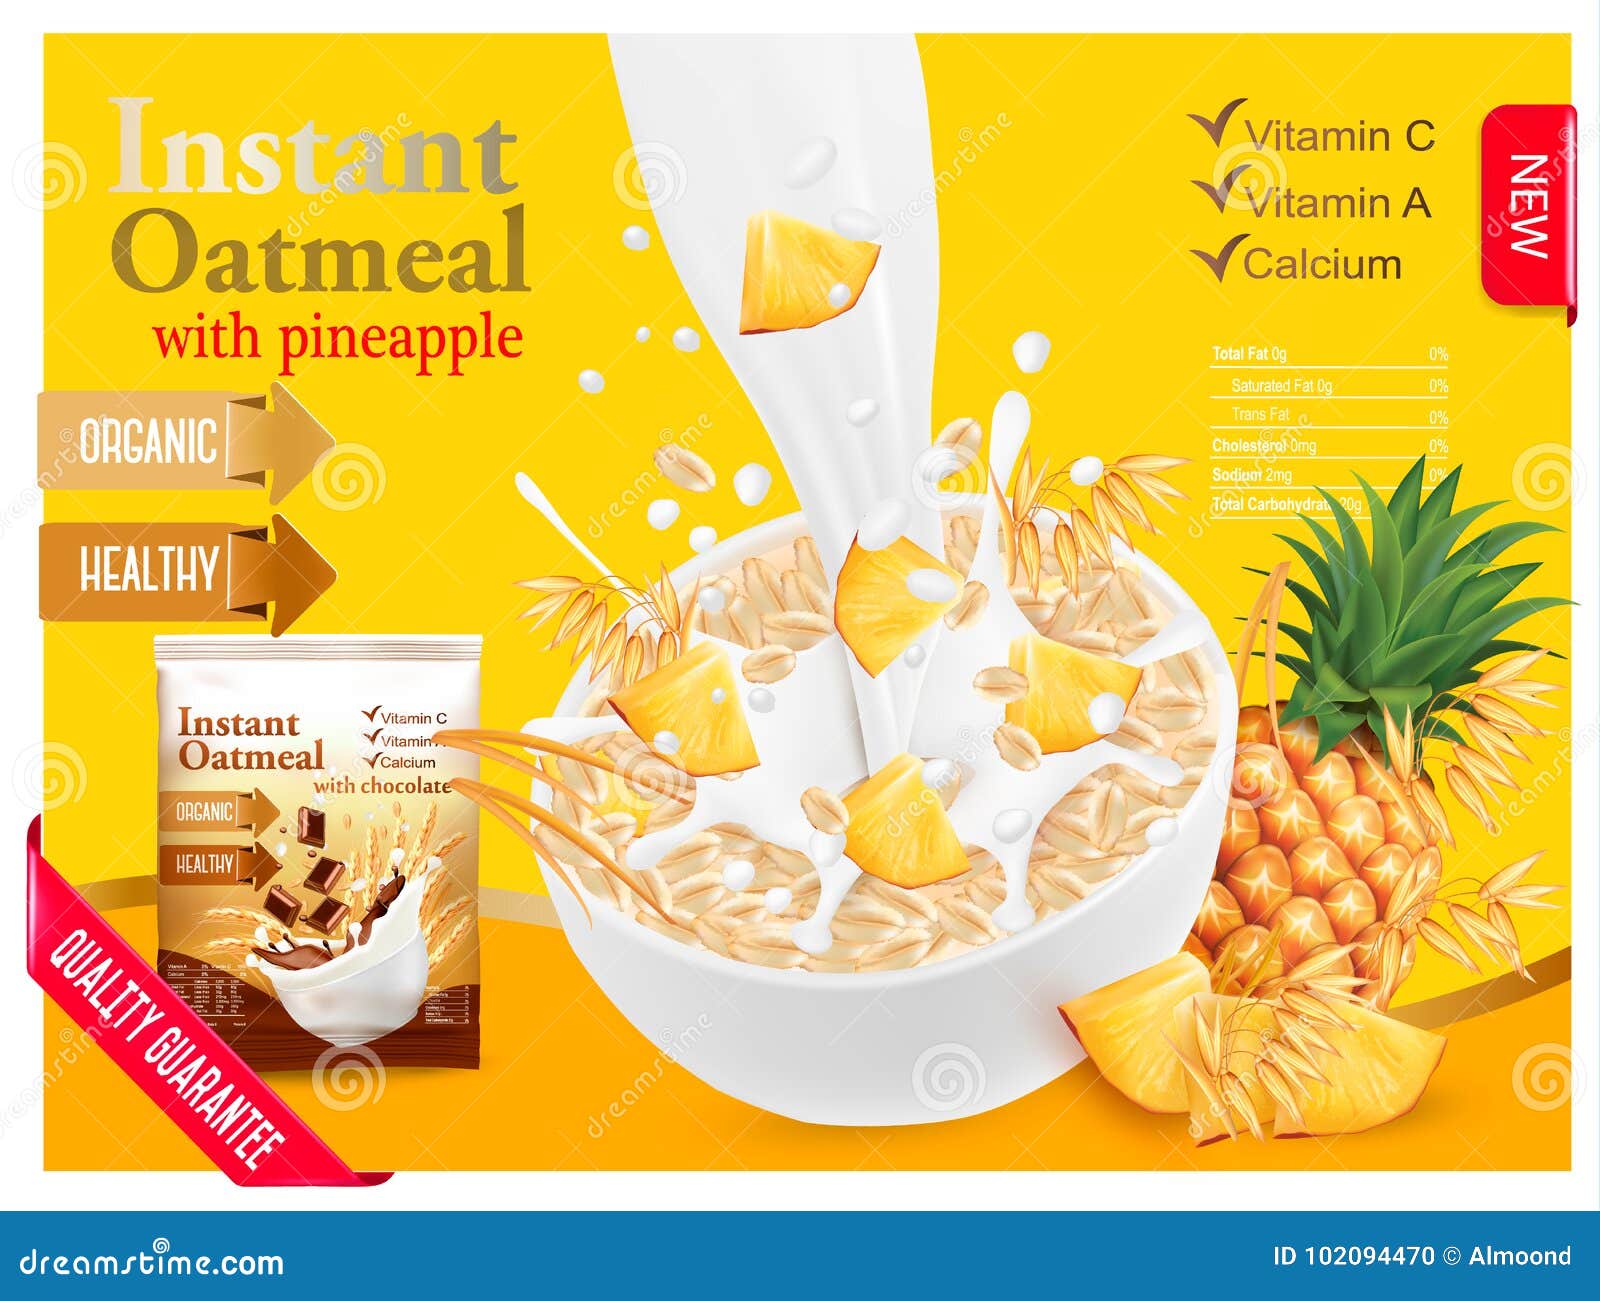 instant oatmeal with berry advert concept.